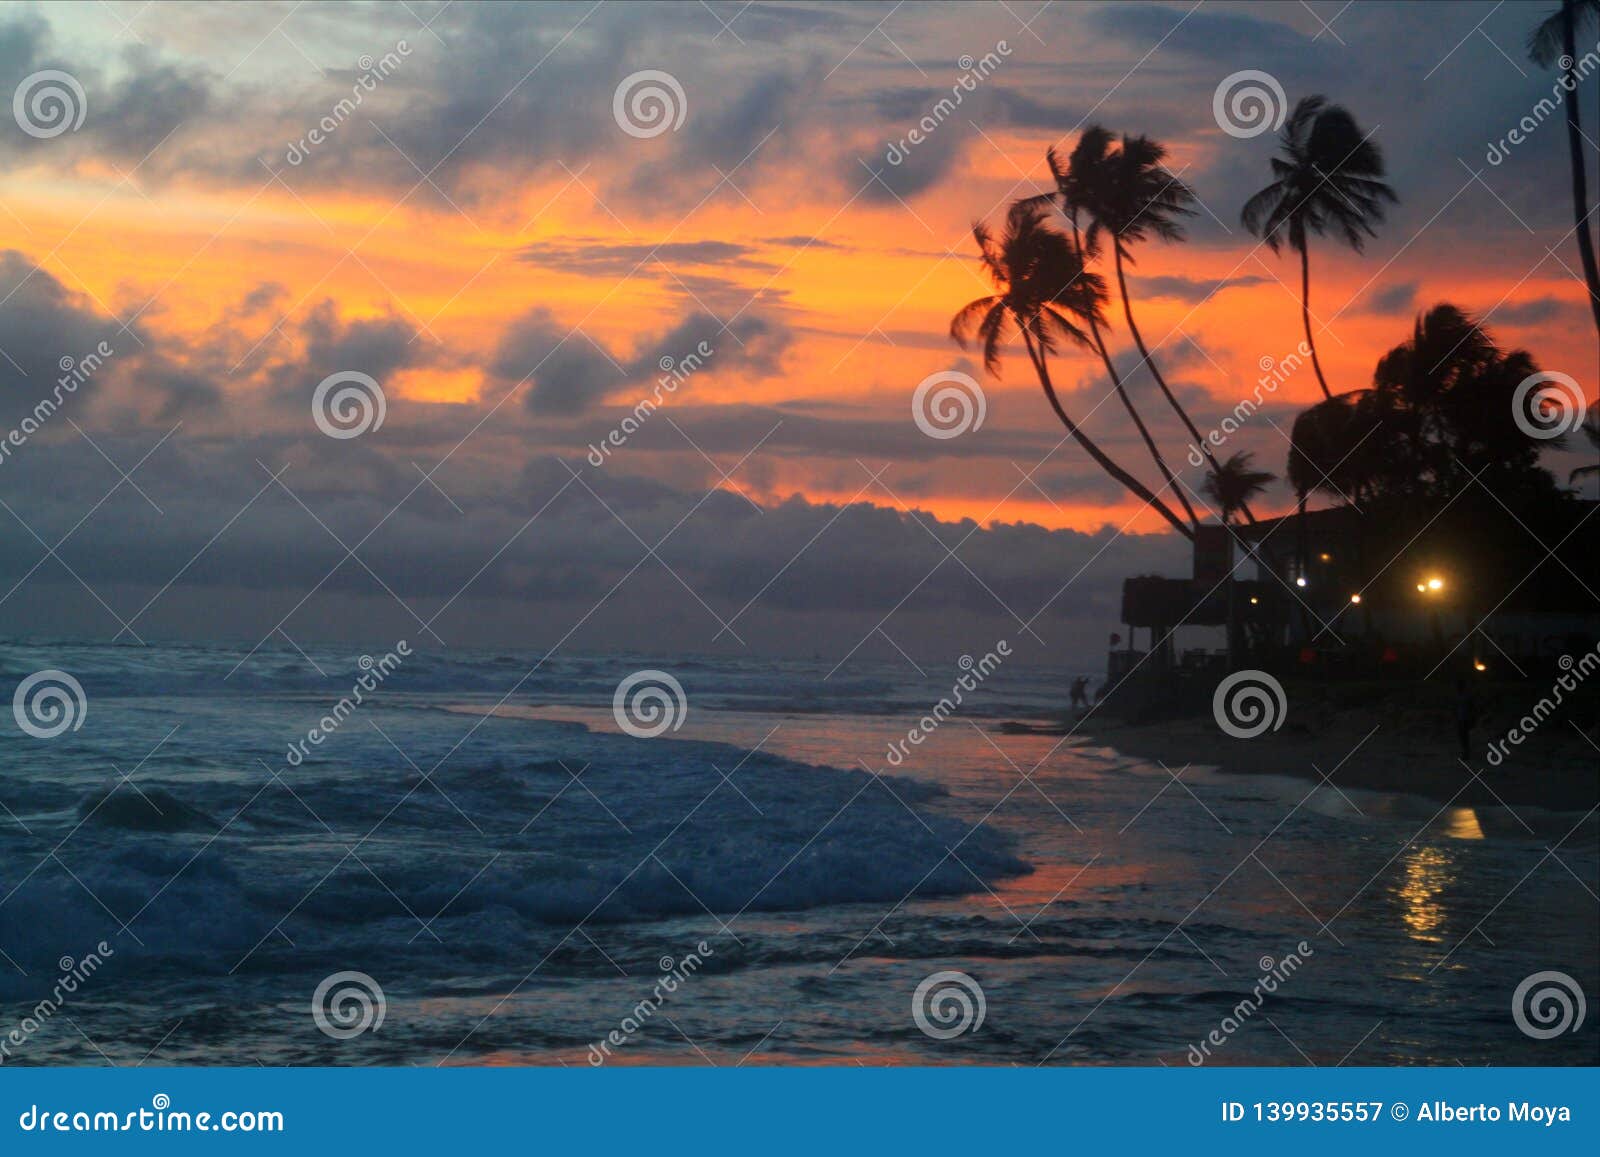 sunset in the caribbean sea paradise